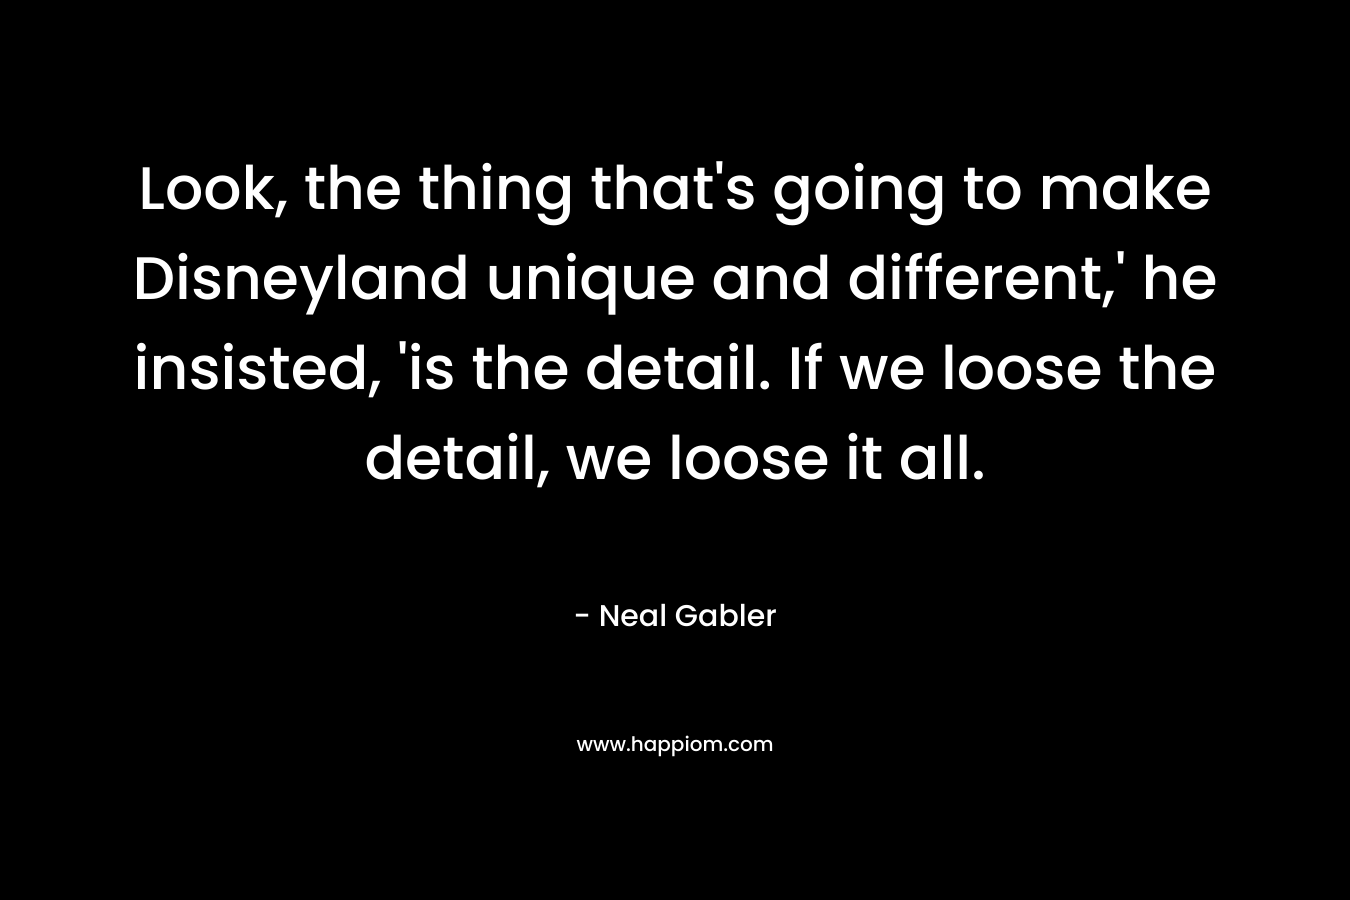 Look, the thing that’s going to make Disneyland unique and different,’ he insisted, ‘is the detail. If we loose the detail, we loose it all. – Neal Gabler